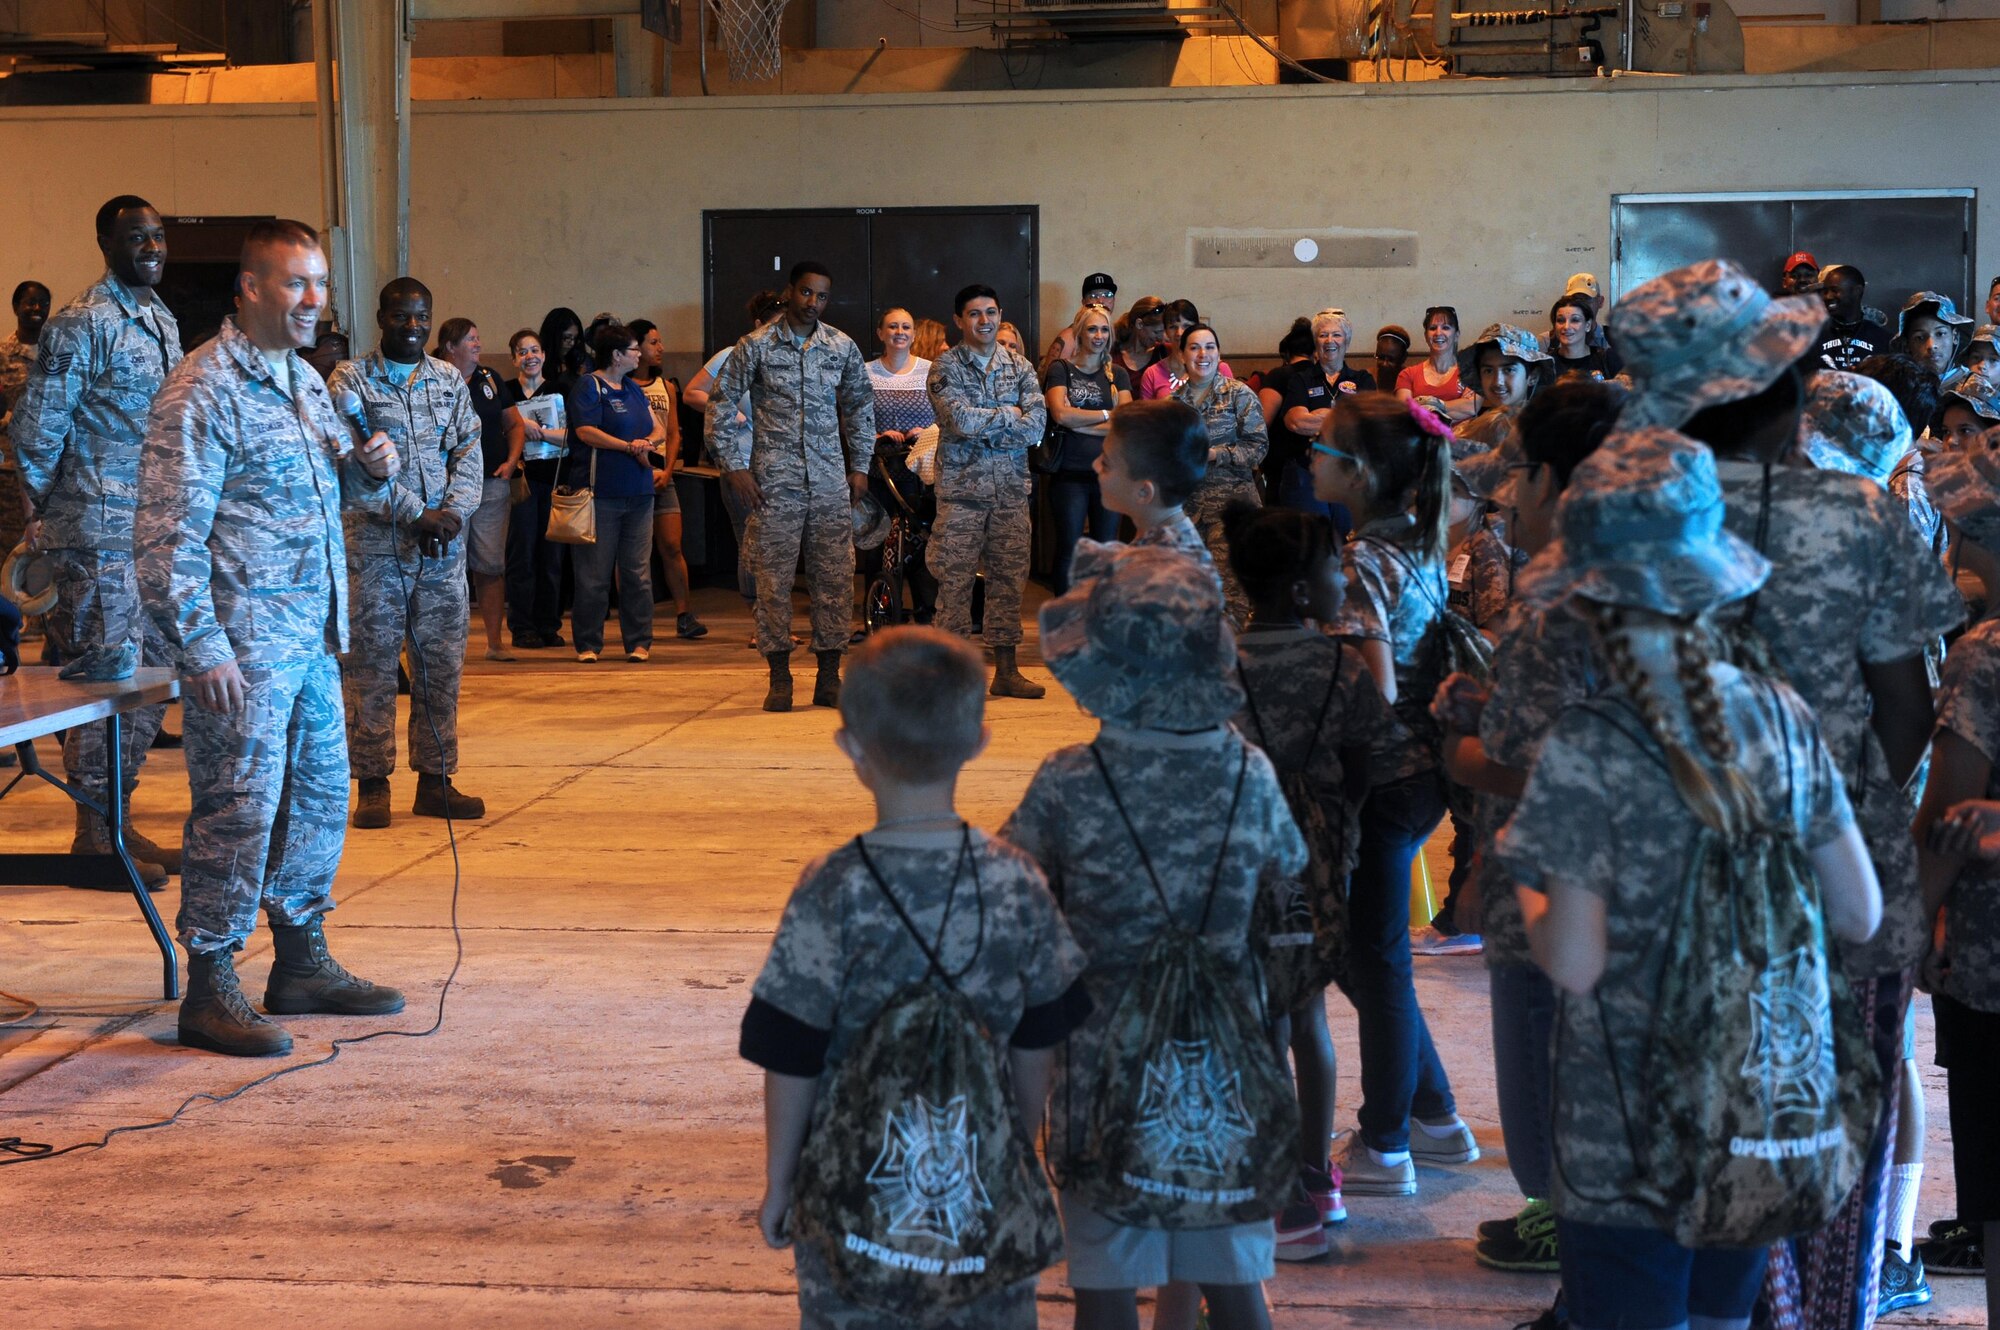 Brig. Gen. Brook Leonard, 56th Fighter Wing commander, gives opening remarks during the Operation Kids event Oct. 15 at Luke Air Force Base, Ariz. The Operations Kids event was held to educate young thunderbolts on the deployment process. (U.S. Air Force Photos by Airman 1st Class Pedro Mota)